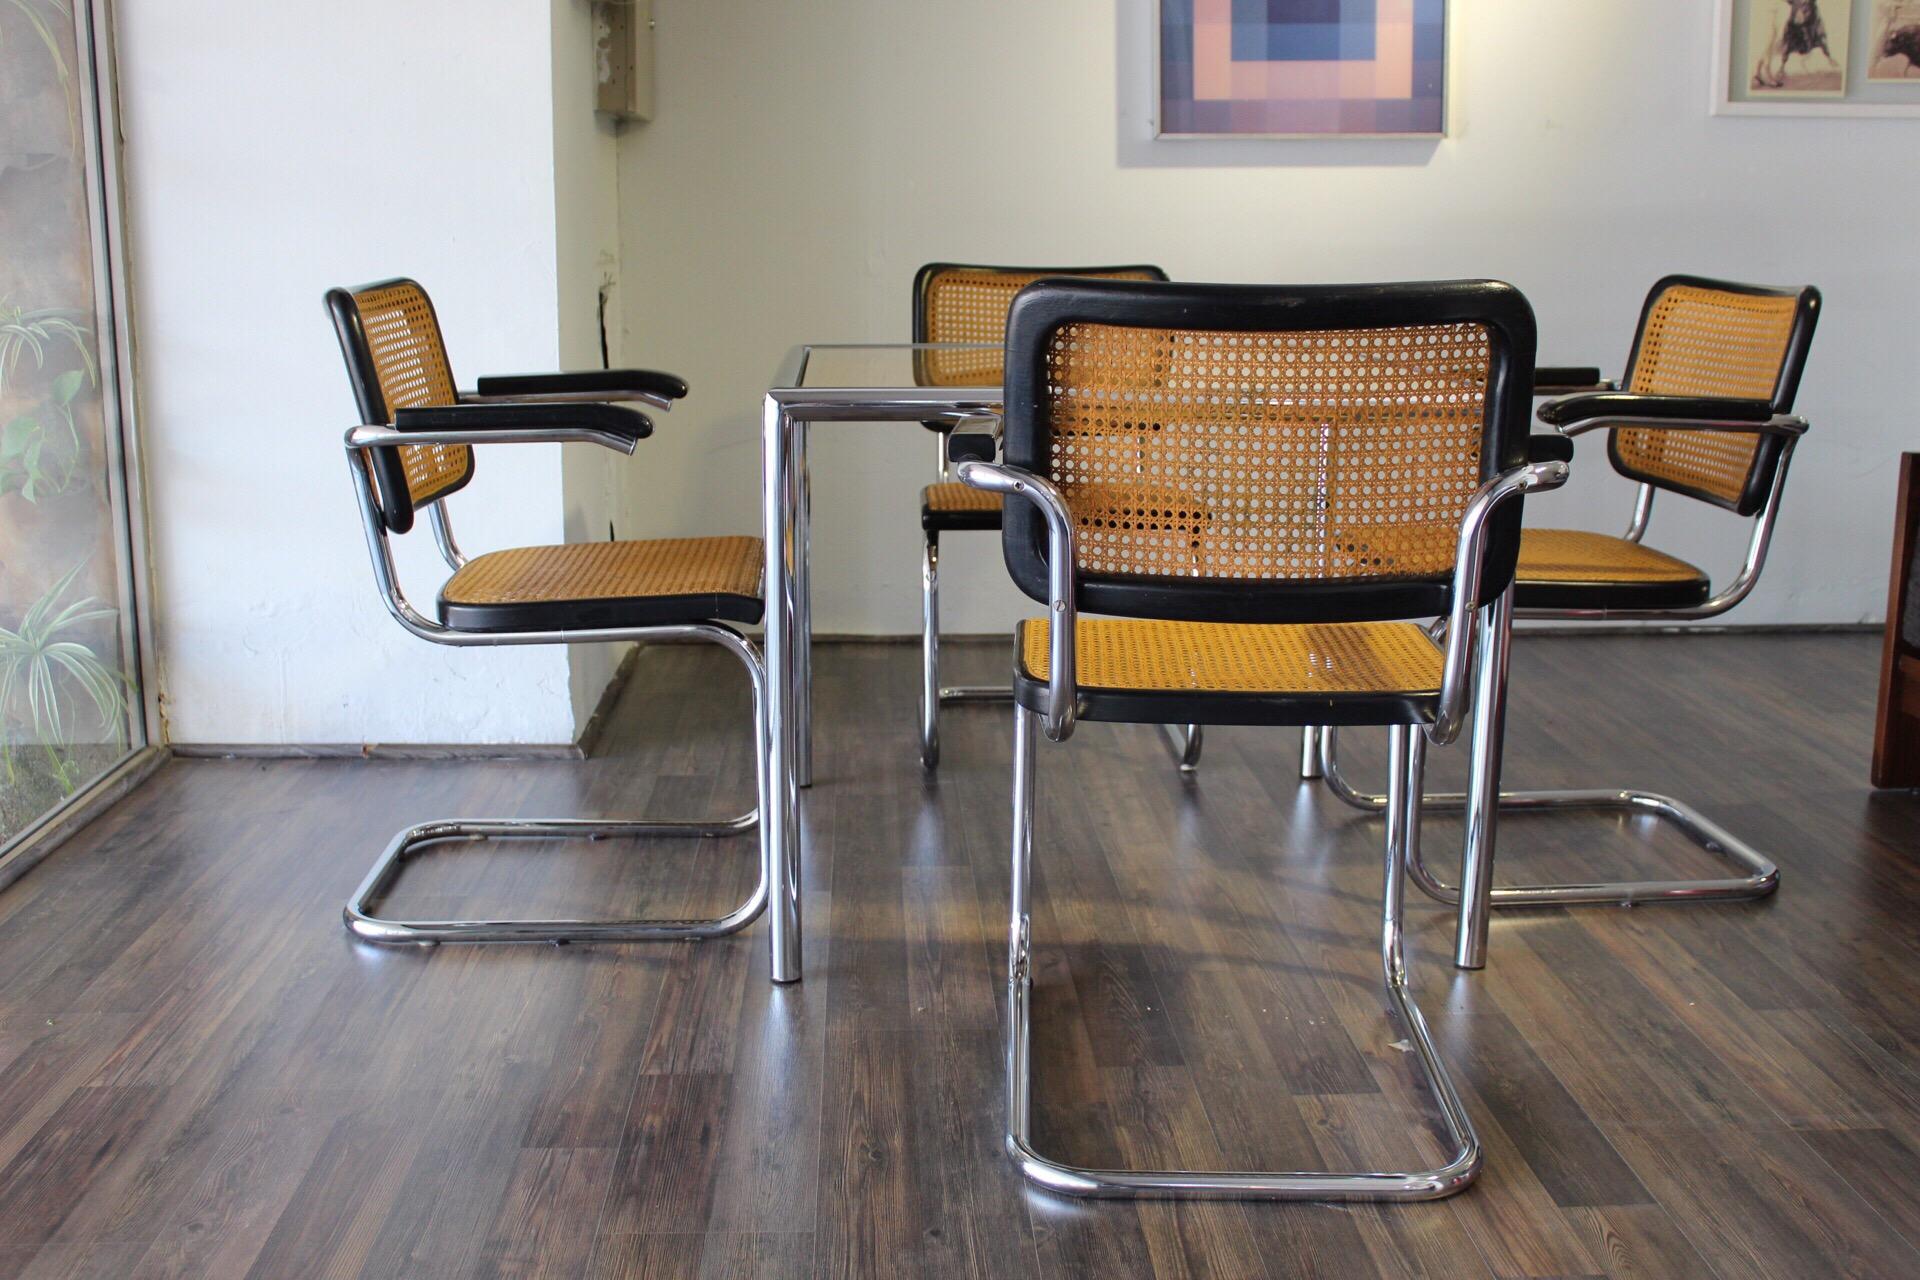 Dining Set of 4 Marcel Breuer chairs and table, tubular chrome frame, original cane seats and black lacquered wood. I bought this complete set from the original owner in Palm Springs about 20 years ago. If you need more detail of the pieces, please